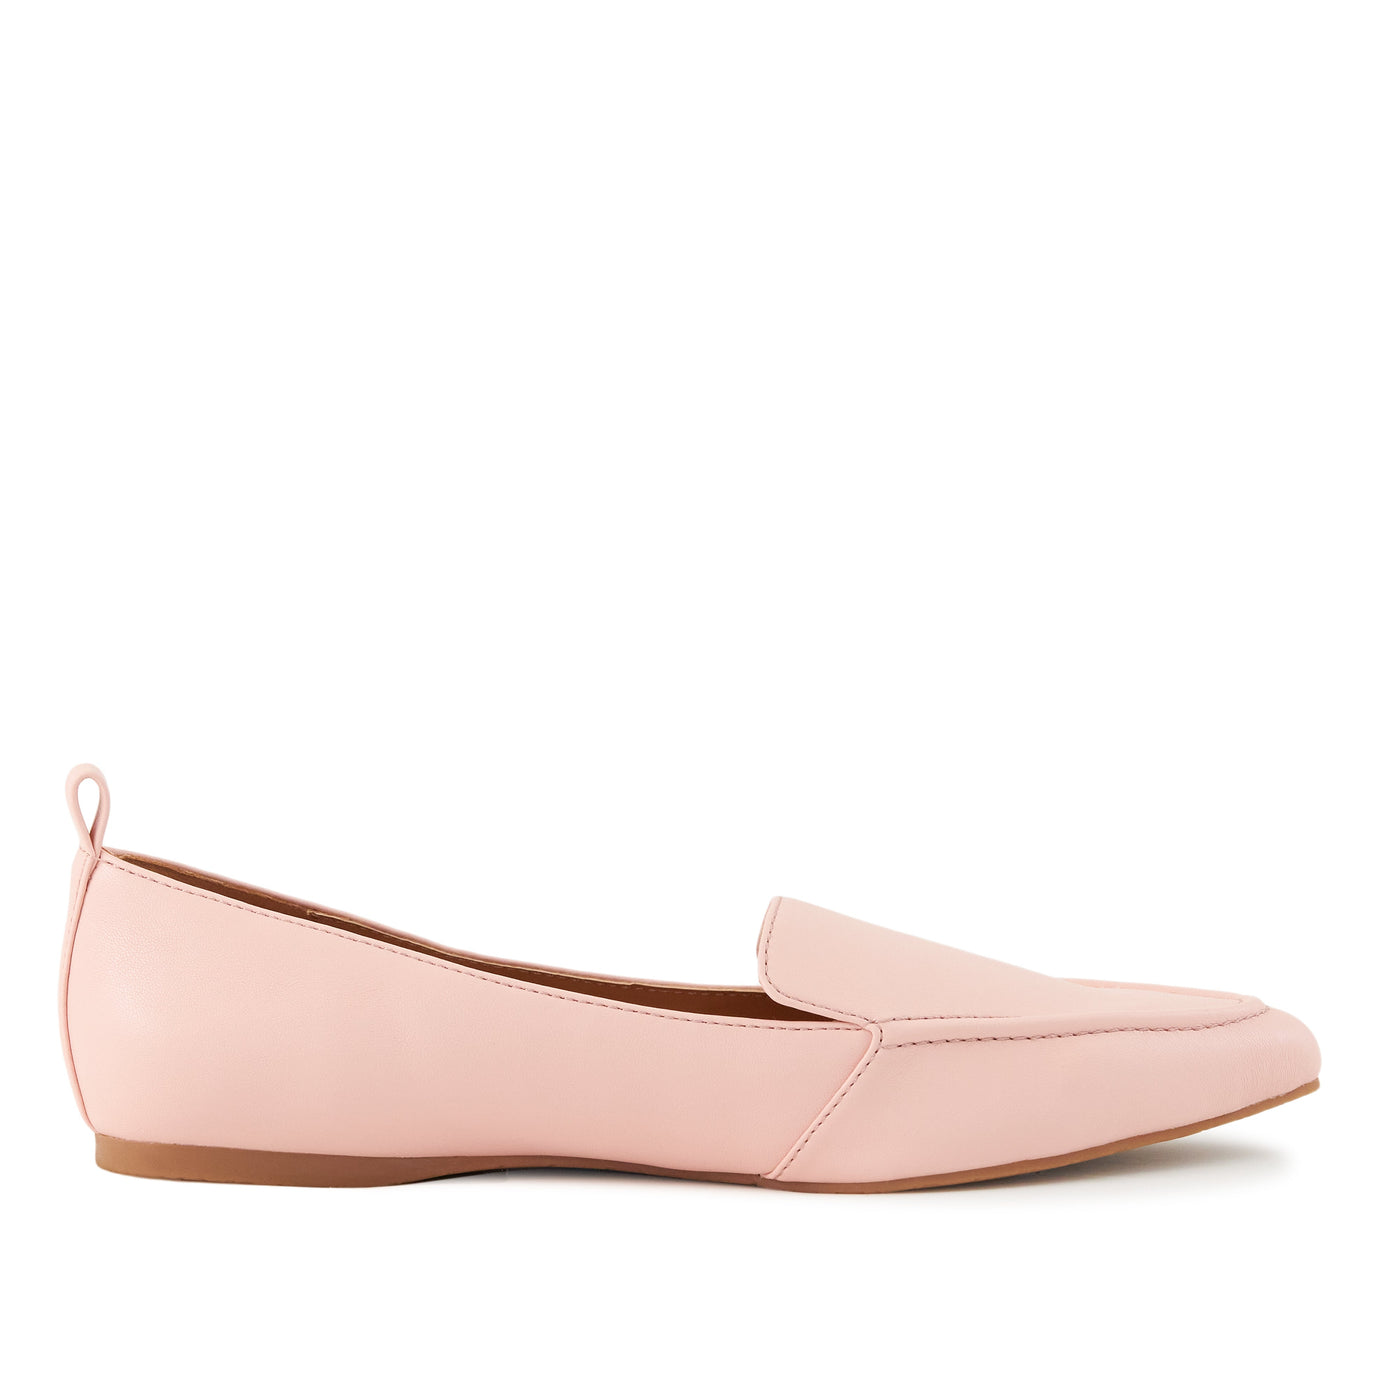 Women's Flat Socialite Pink by Nest Shoes